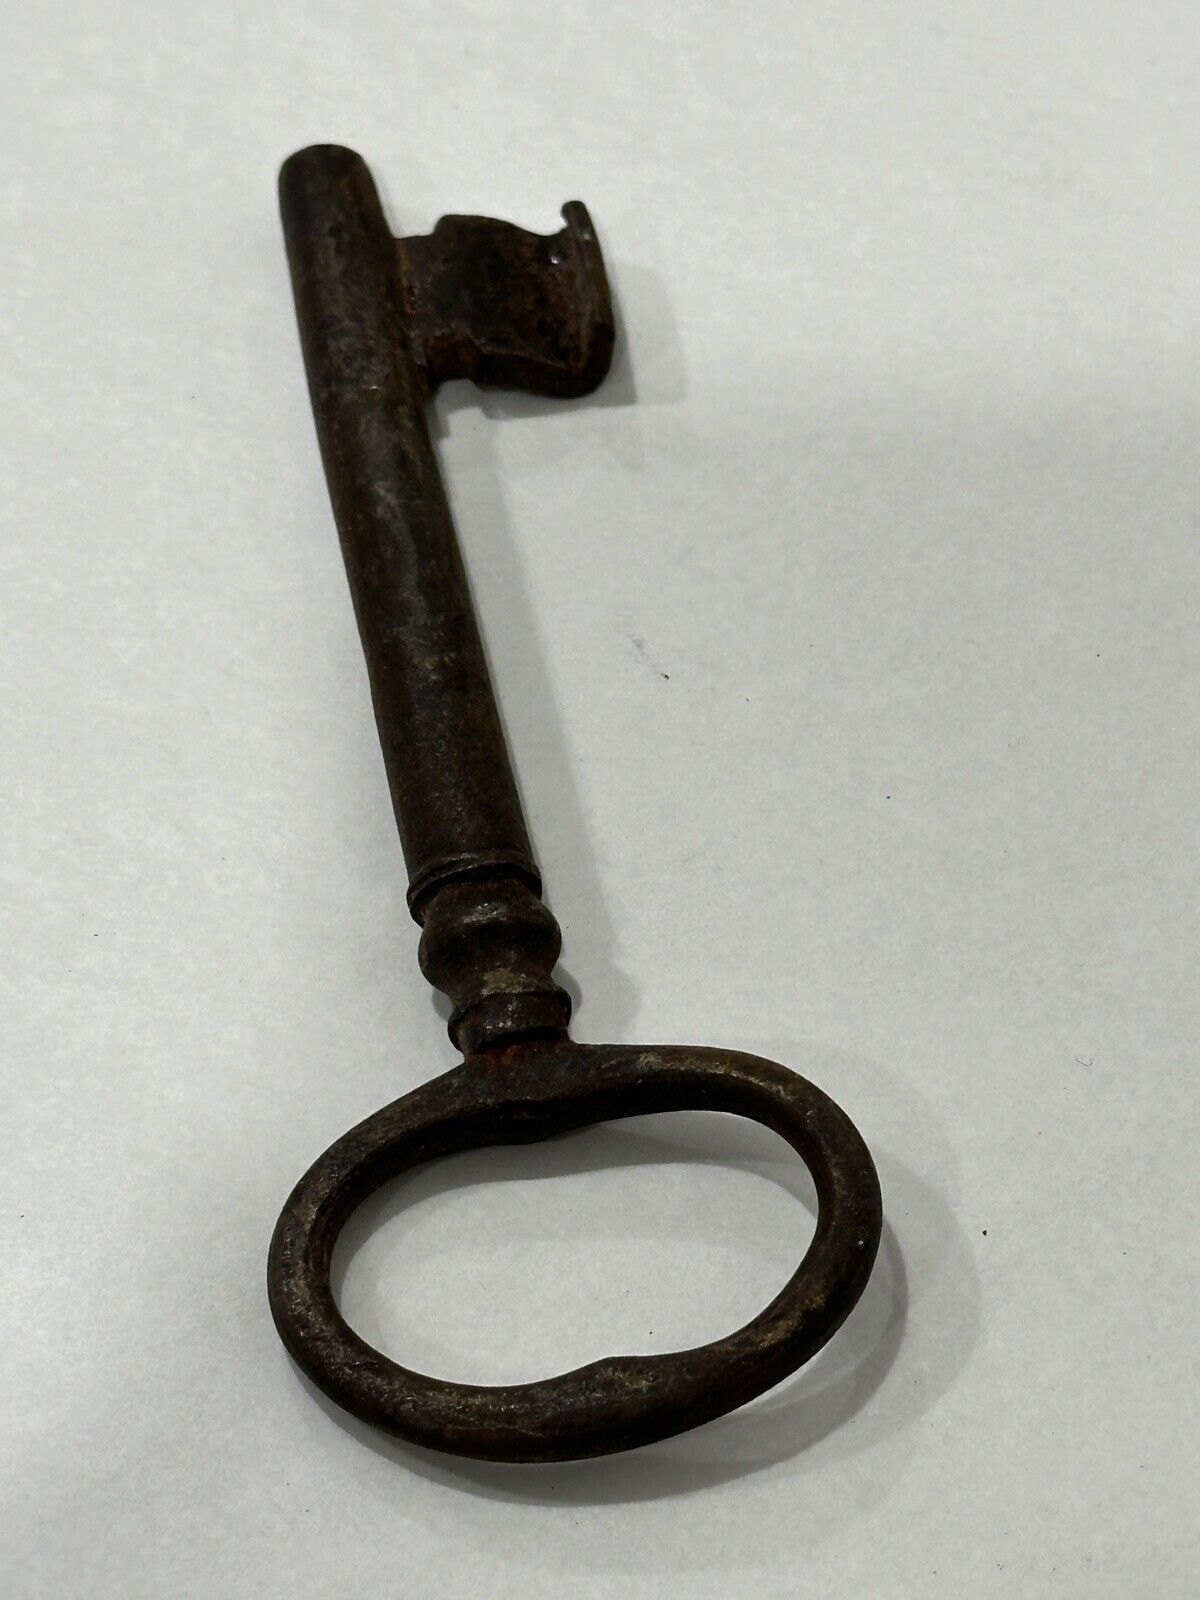 RARE 19TH CENTURY ANTIQUE HUGE COLLECTABLE IRON GATE KEY